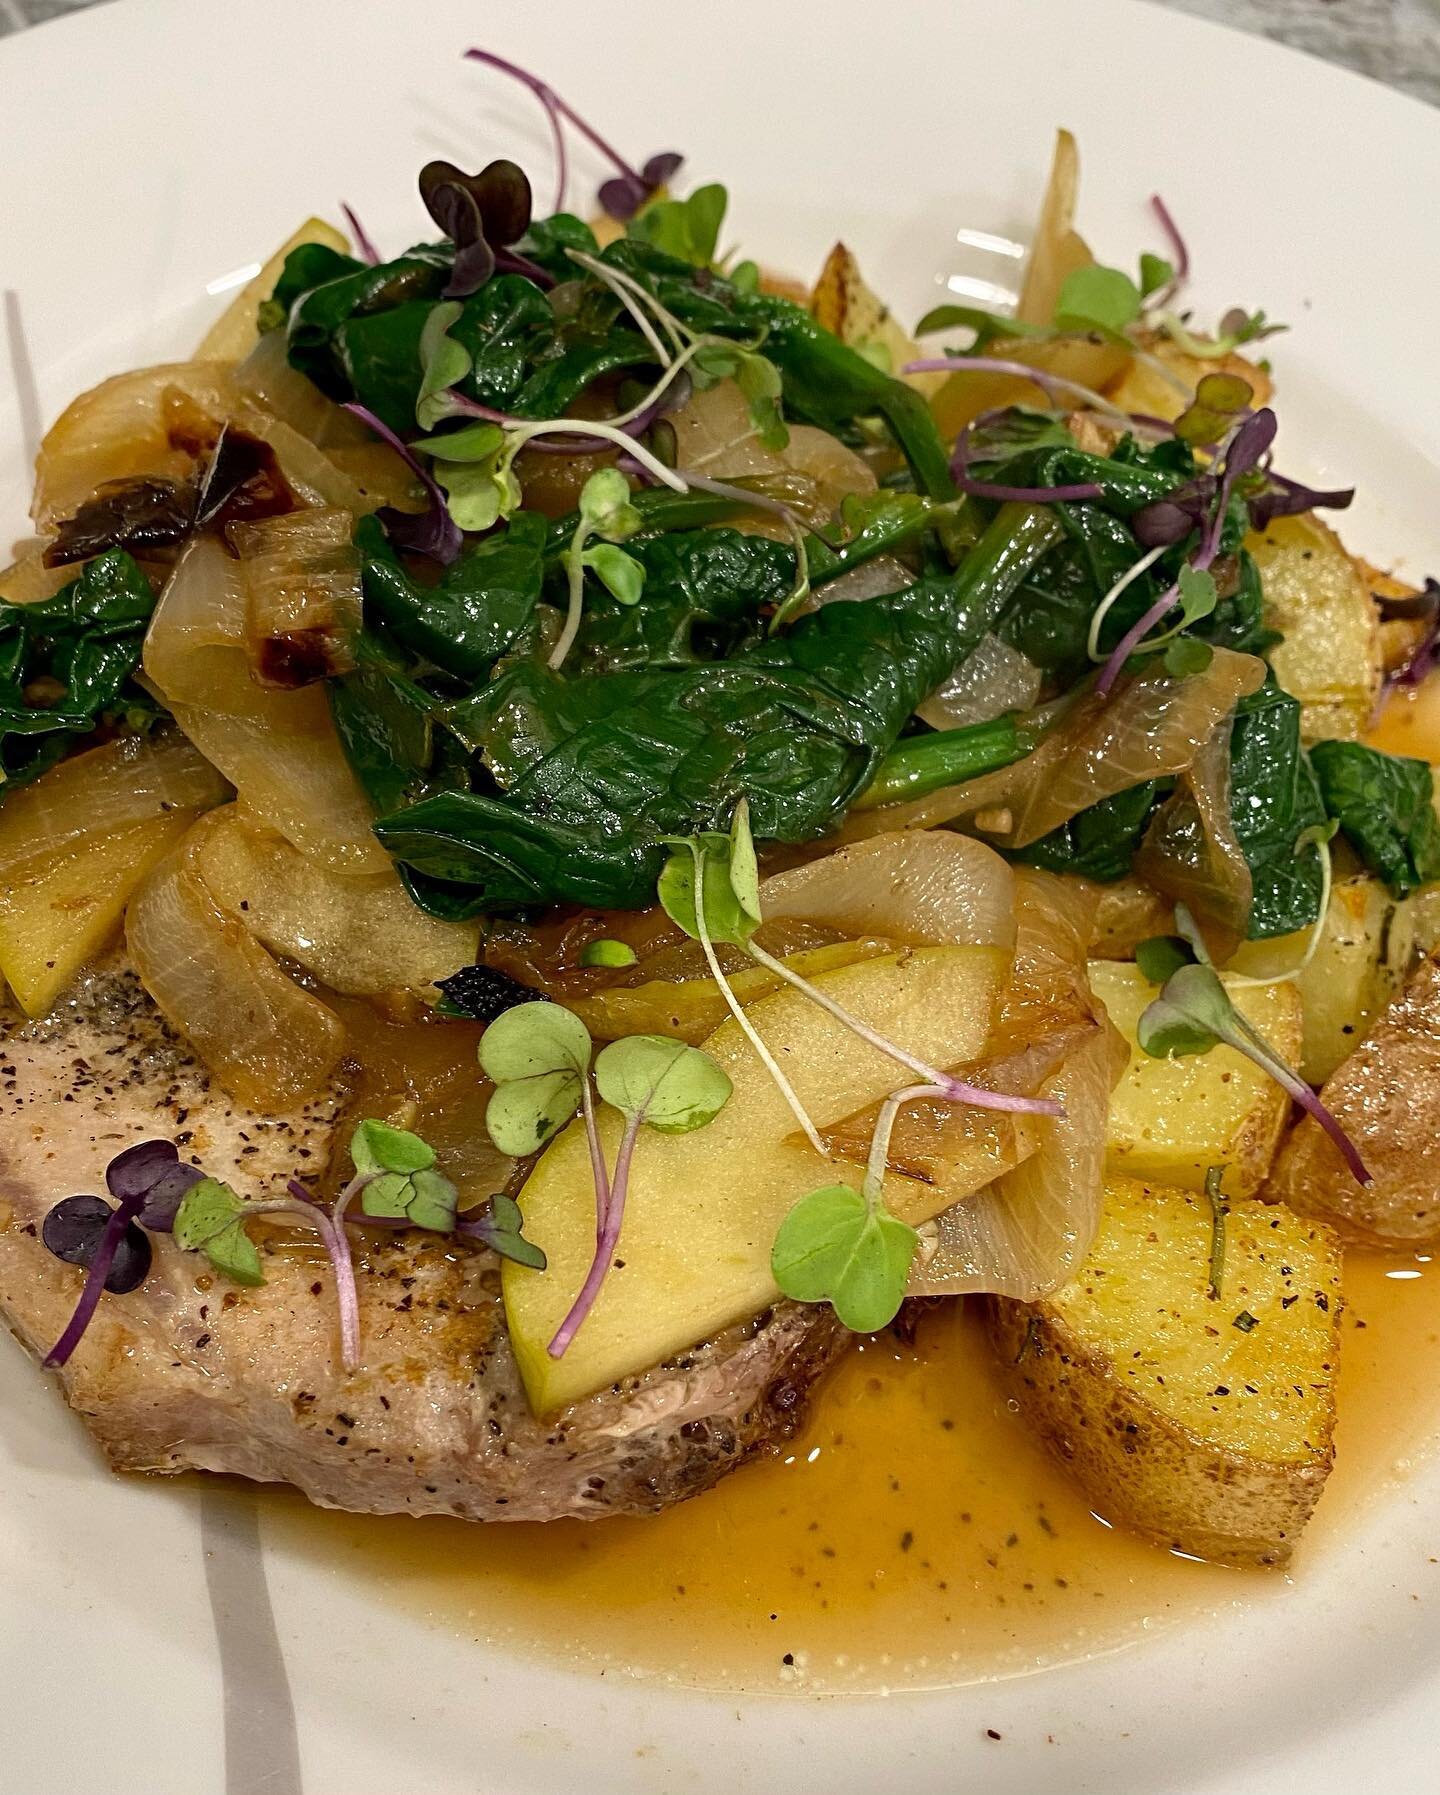 🍽 On the Menu 🍽

Pork chops with Apples and Onions 🧅 🍎 

This is is hands down one of my fave fall meals to make. It looks fancy, but it&rsquo;s easy and pretty quick too. 

Pork chops are seared on the stove top and then finished in the oven. Th